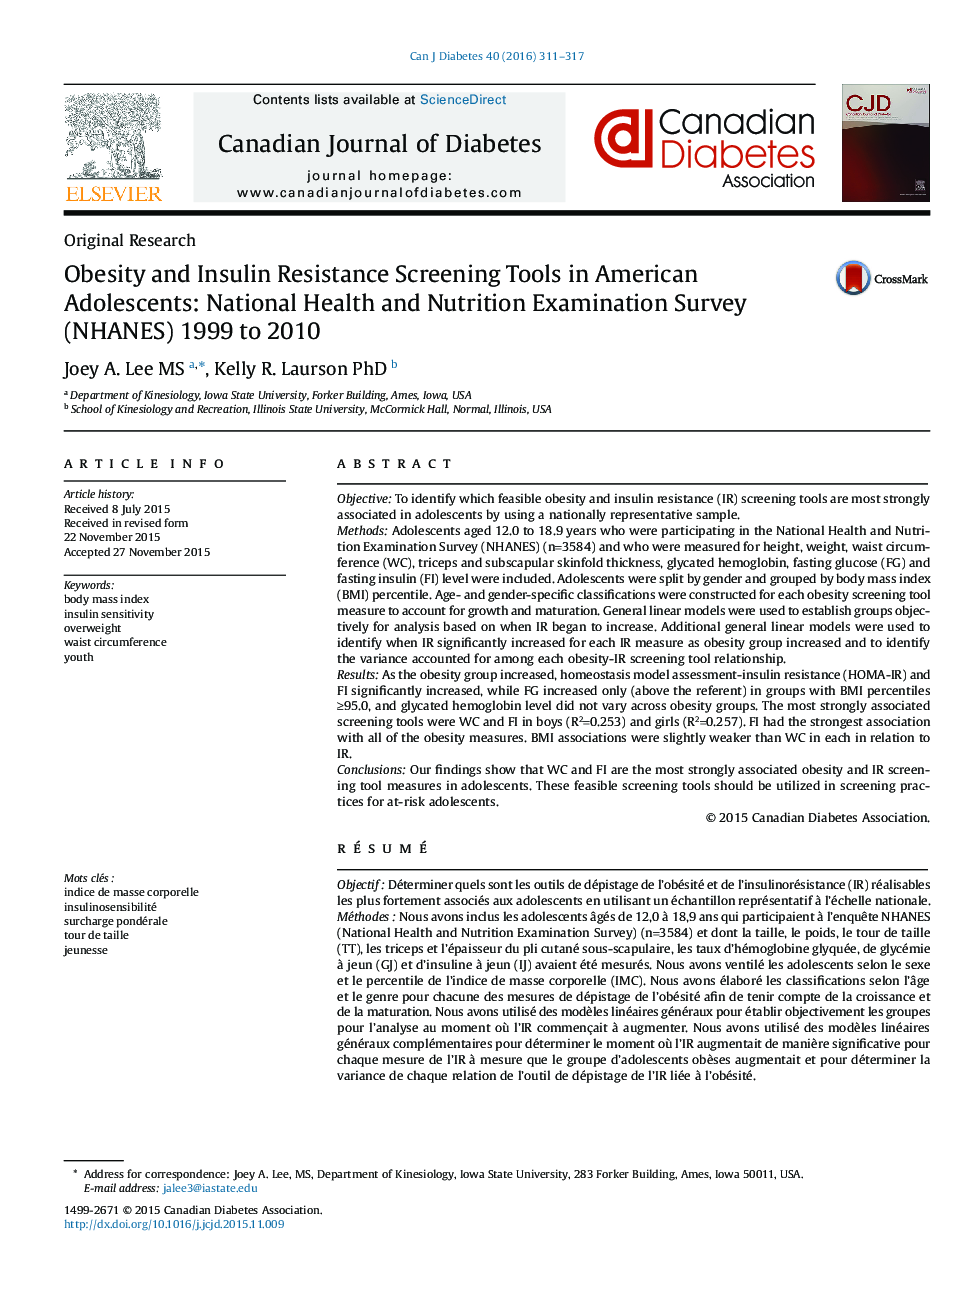 Obesity and Insulin Resistance Screening Tools in American Adolescents: National Health and Nutrition Examination Survey (NHANES) 1999 to 2010